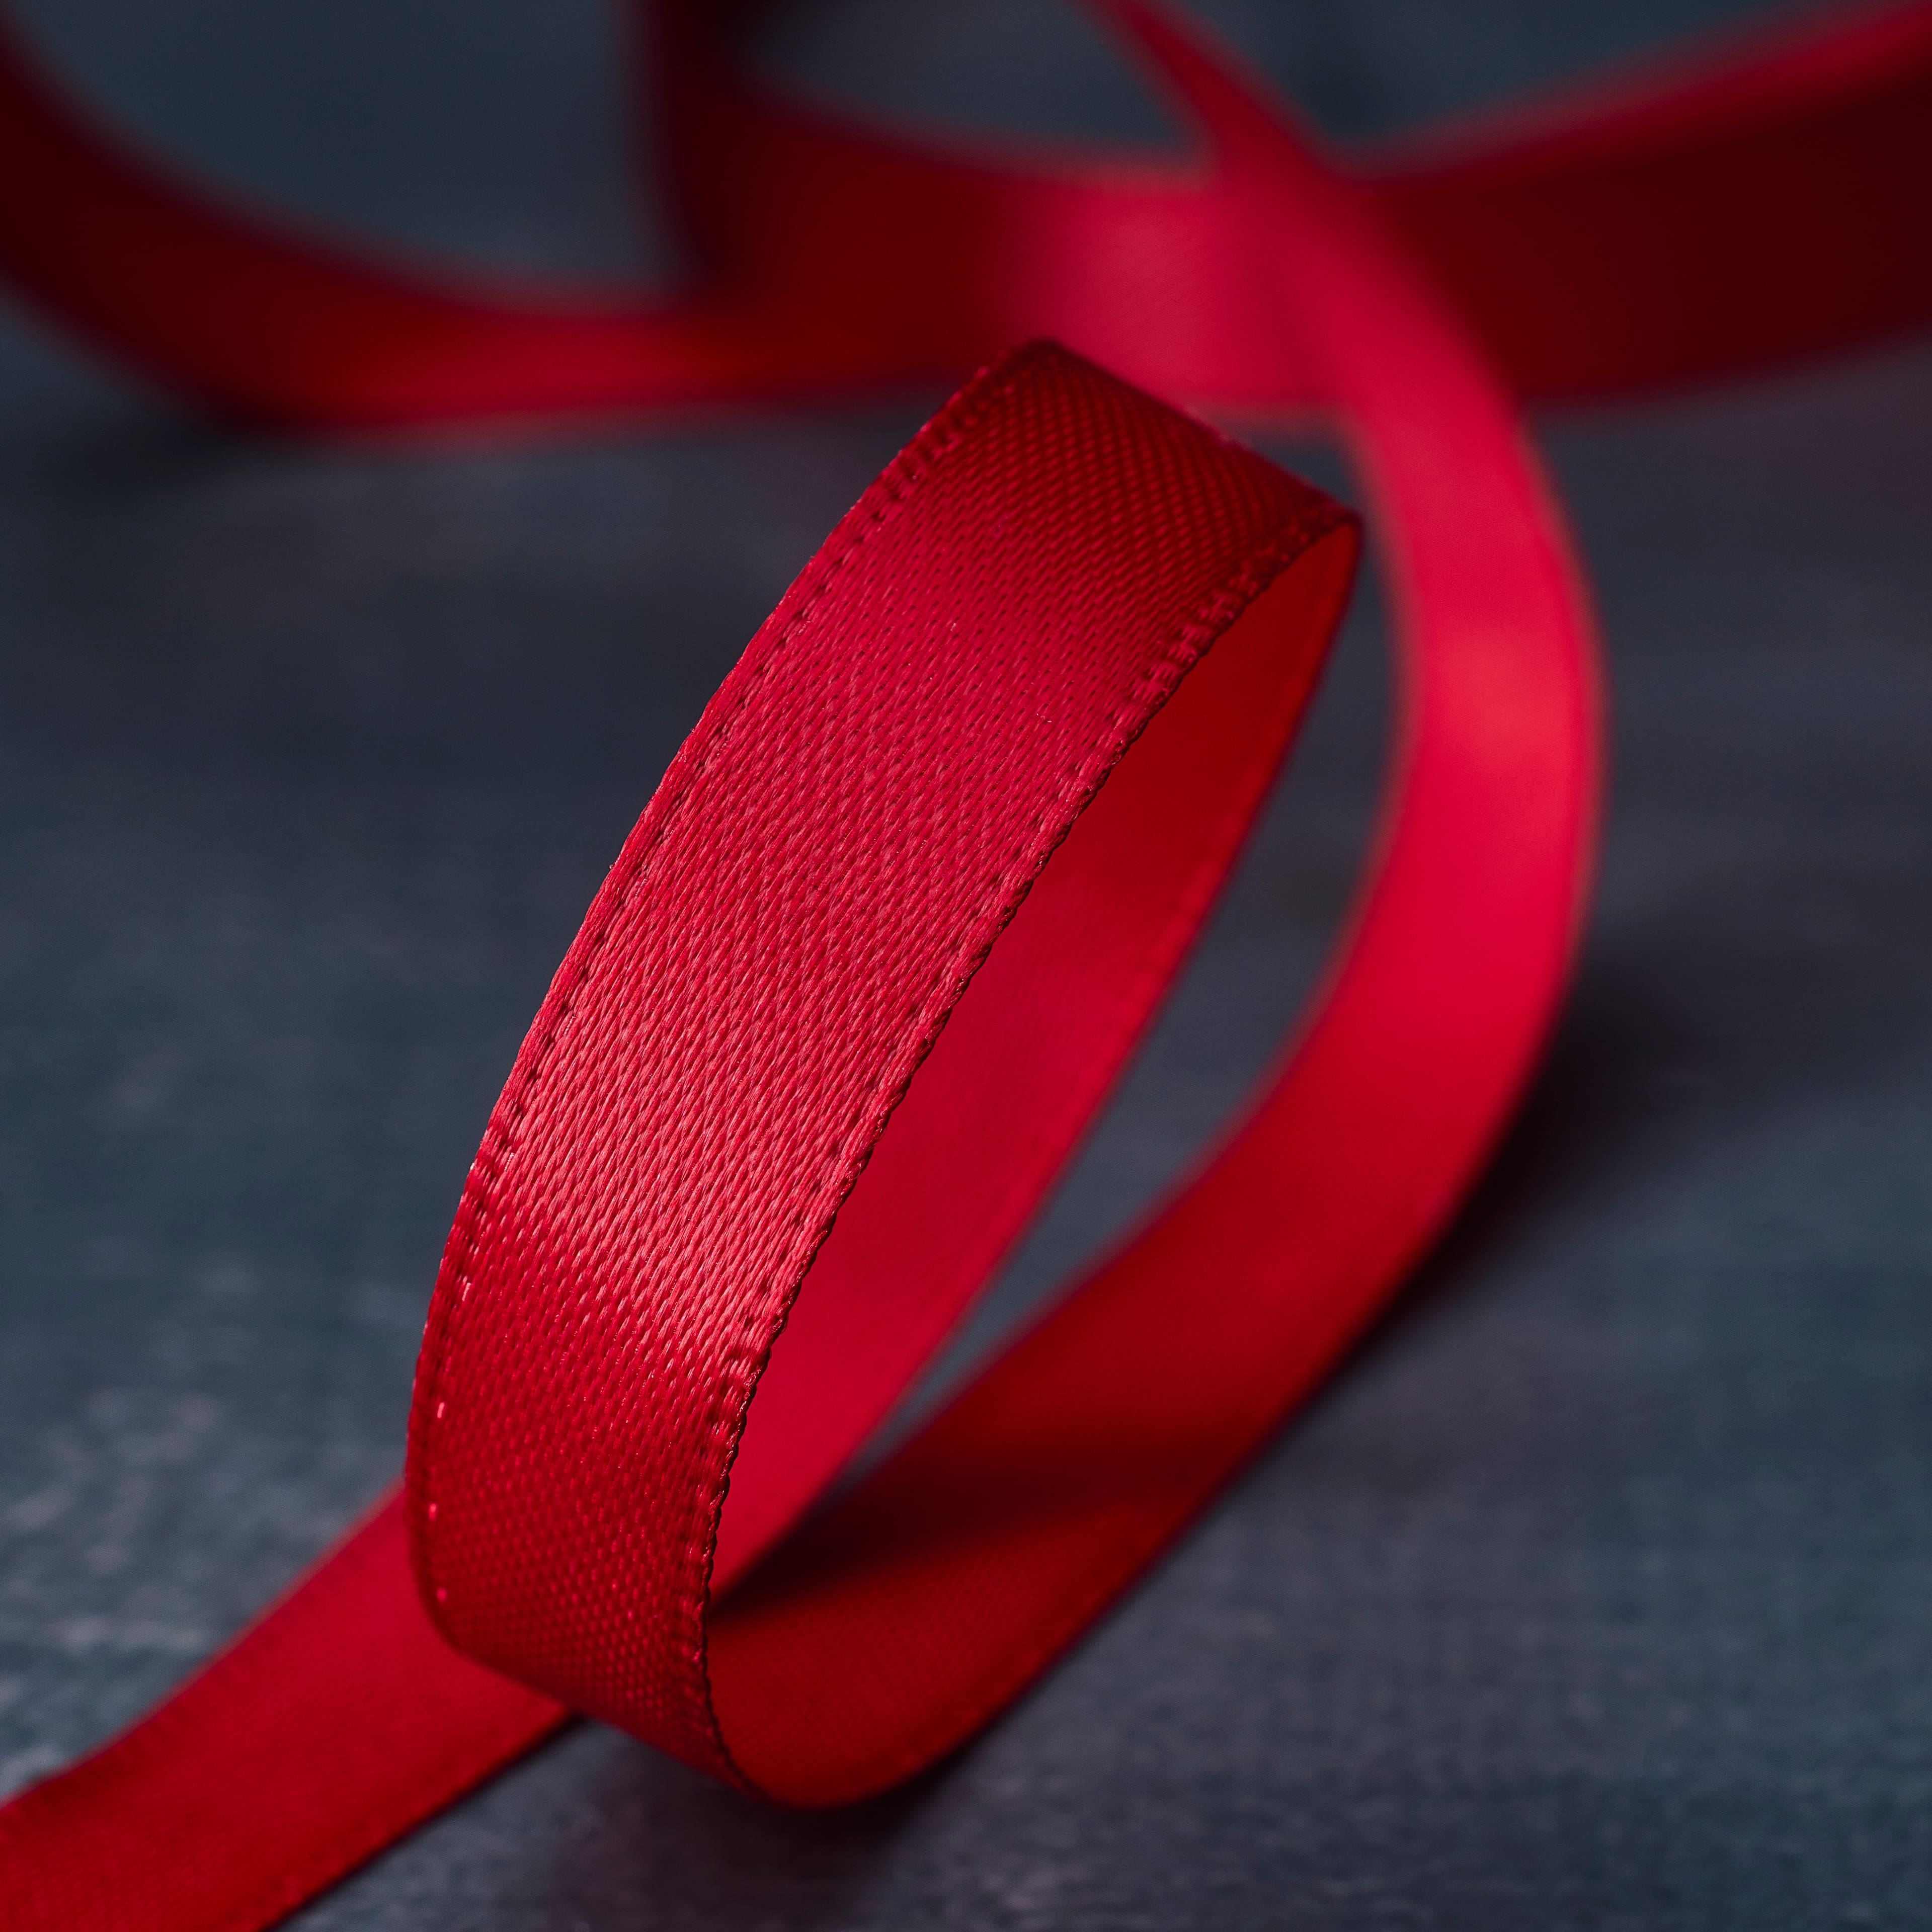 3/8 Satin Double-Faced Ribbon by 360° in Red by Celebrate It